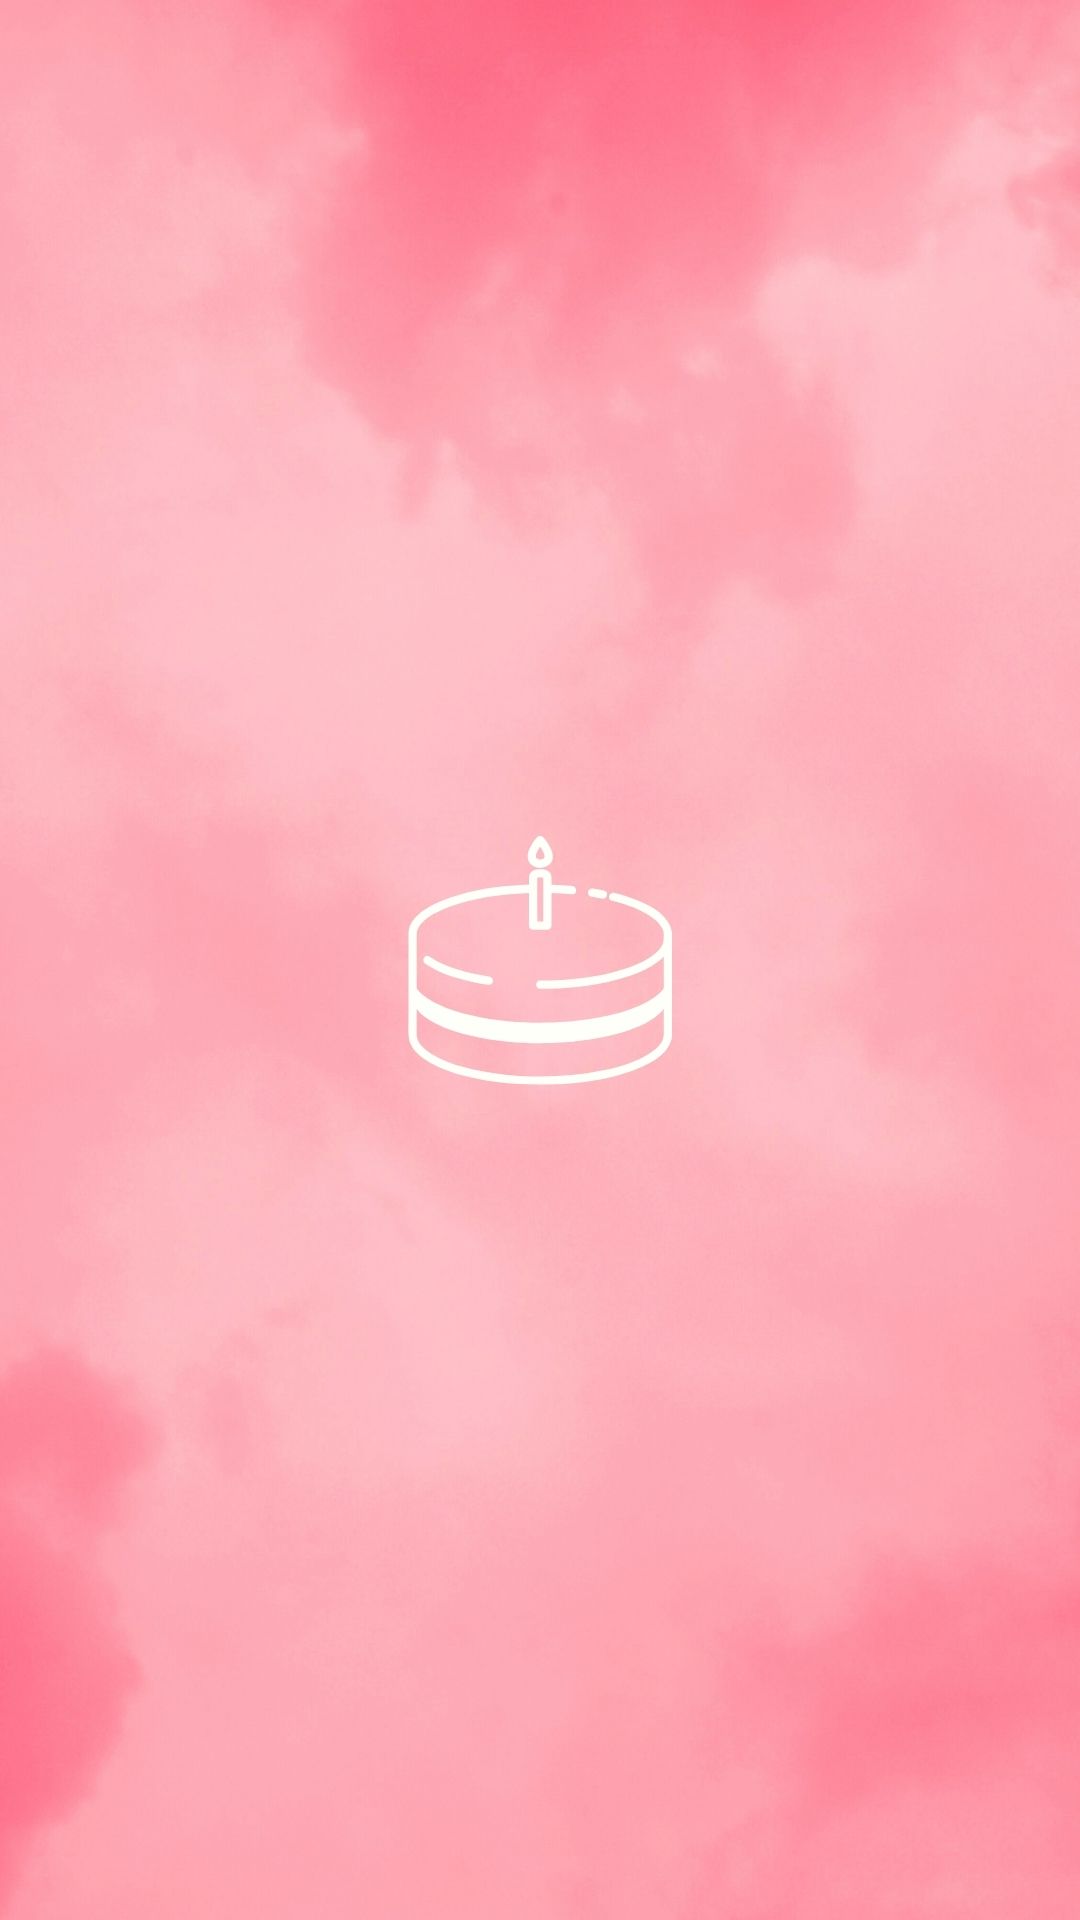 birthday wishes instagram highlight cover pink